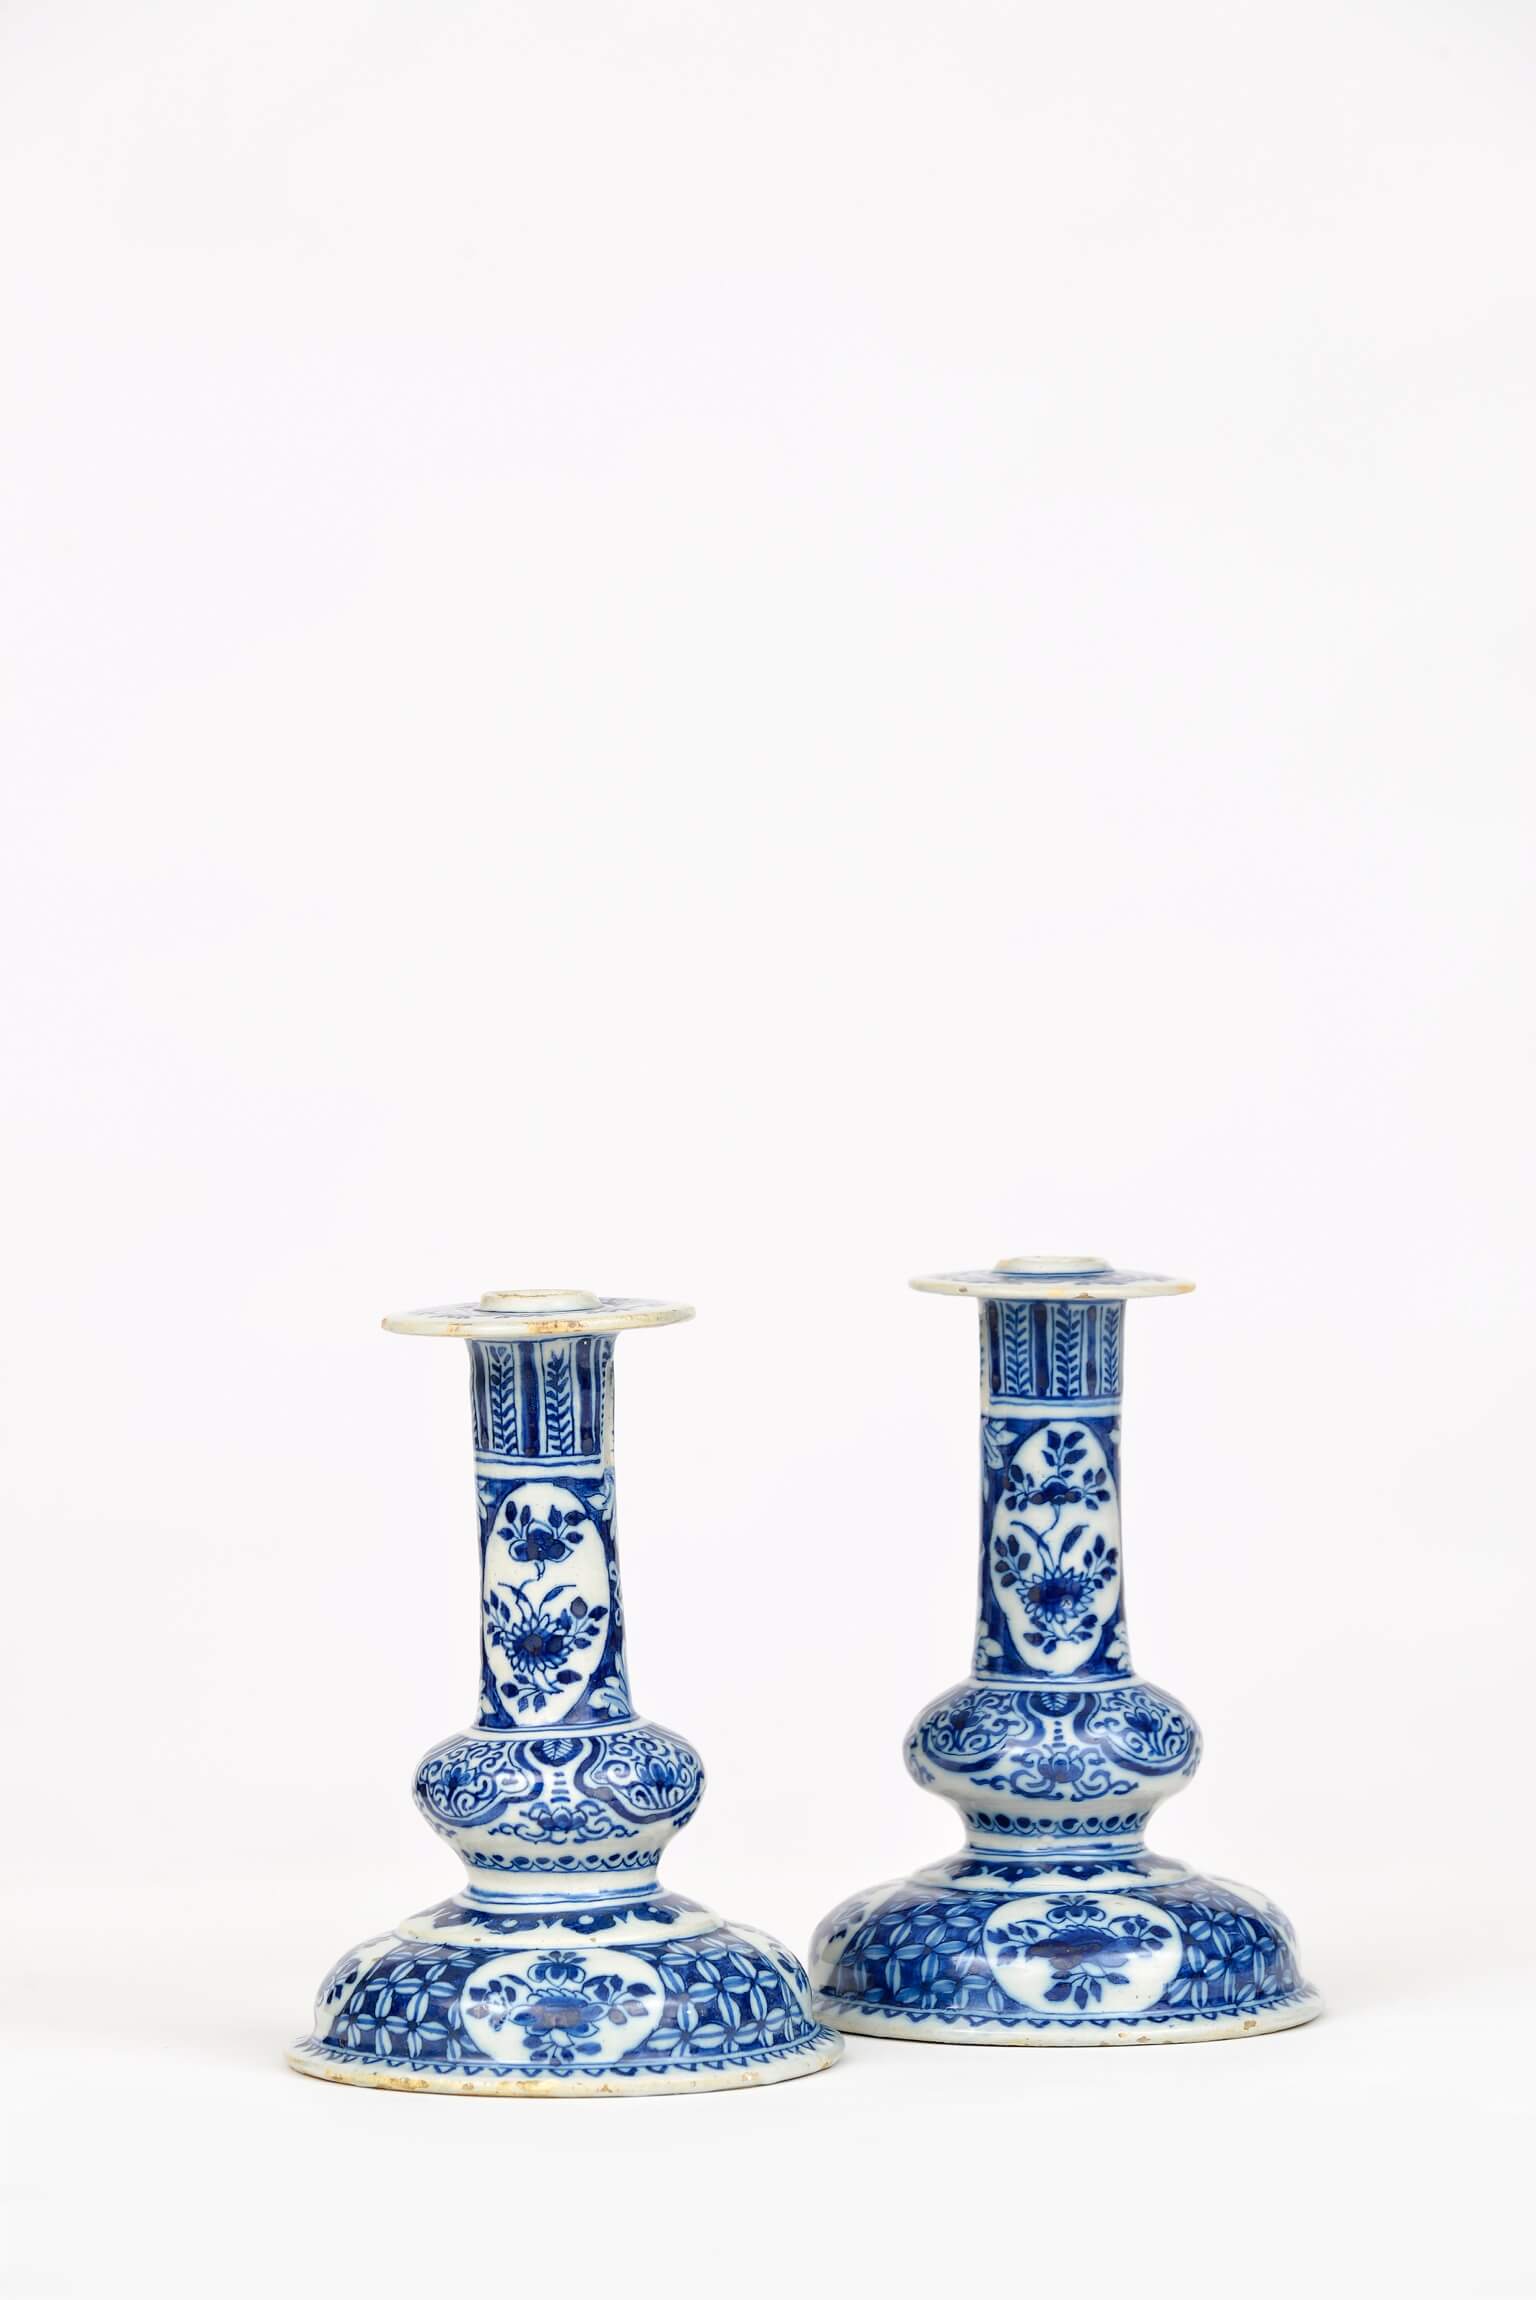 Antique delftware blue and white candlesticks